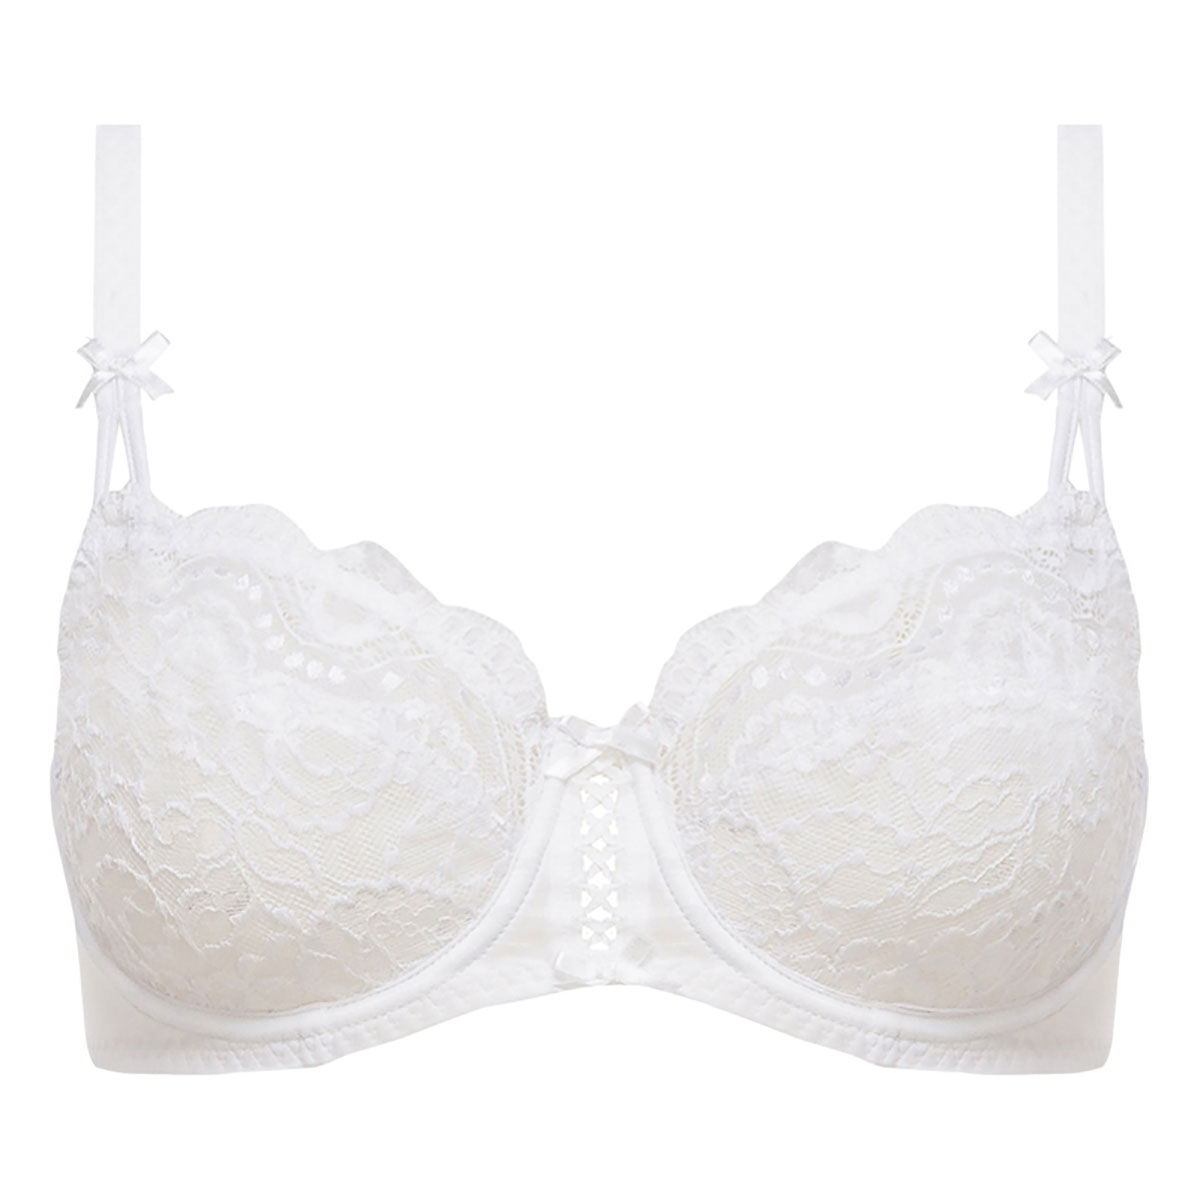 NEW HIGH QUALITY BRA LACE UNDERWIRED BRA WHITE Floral Lace 